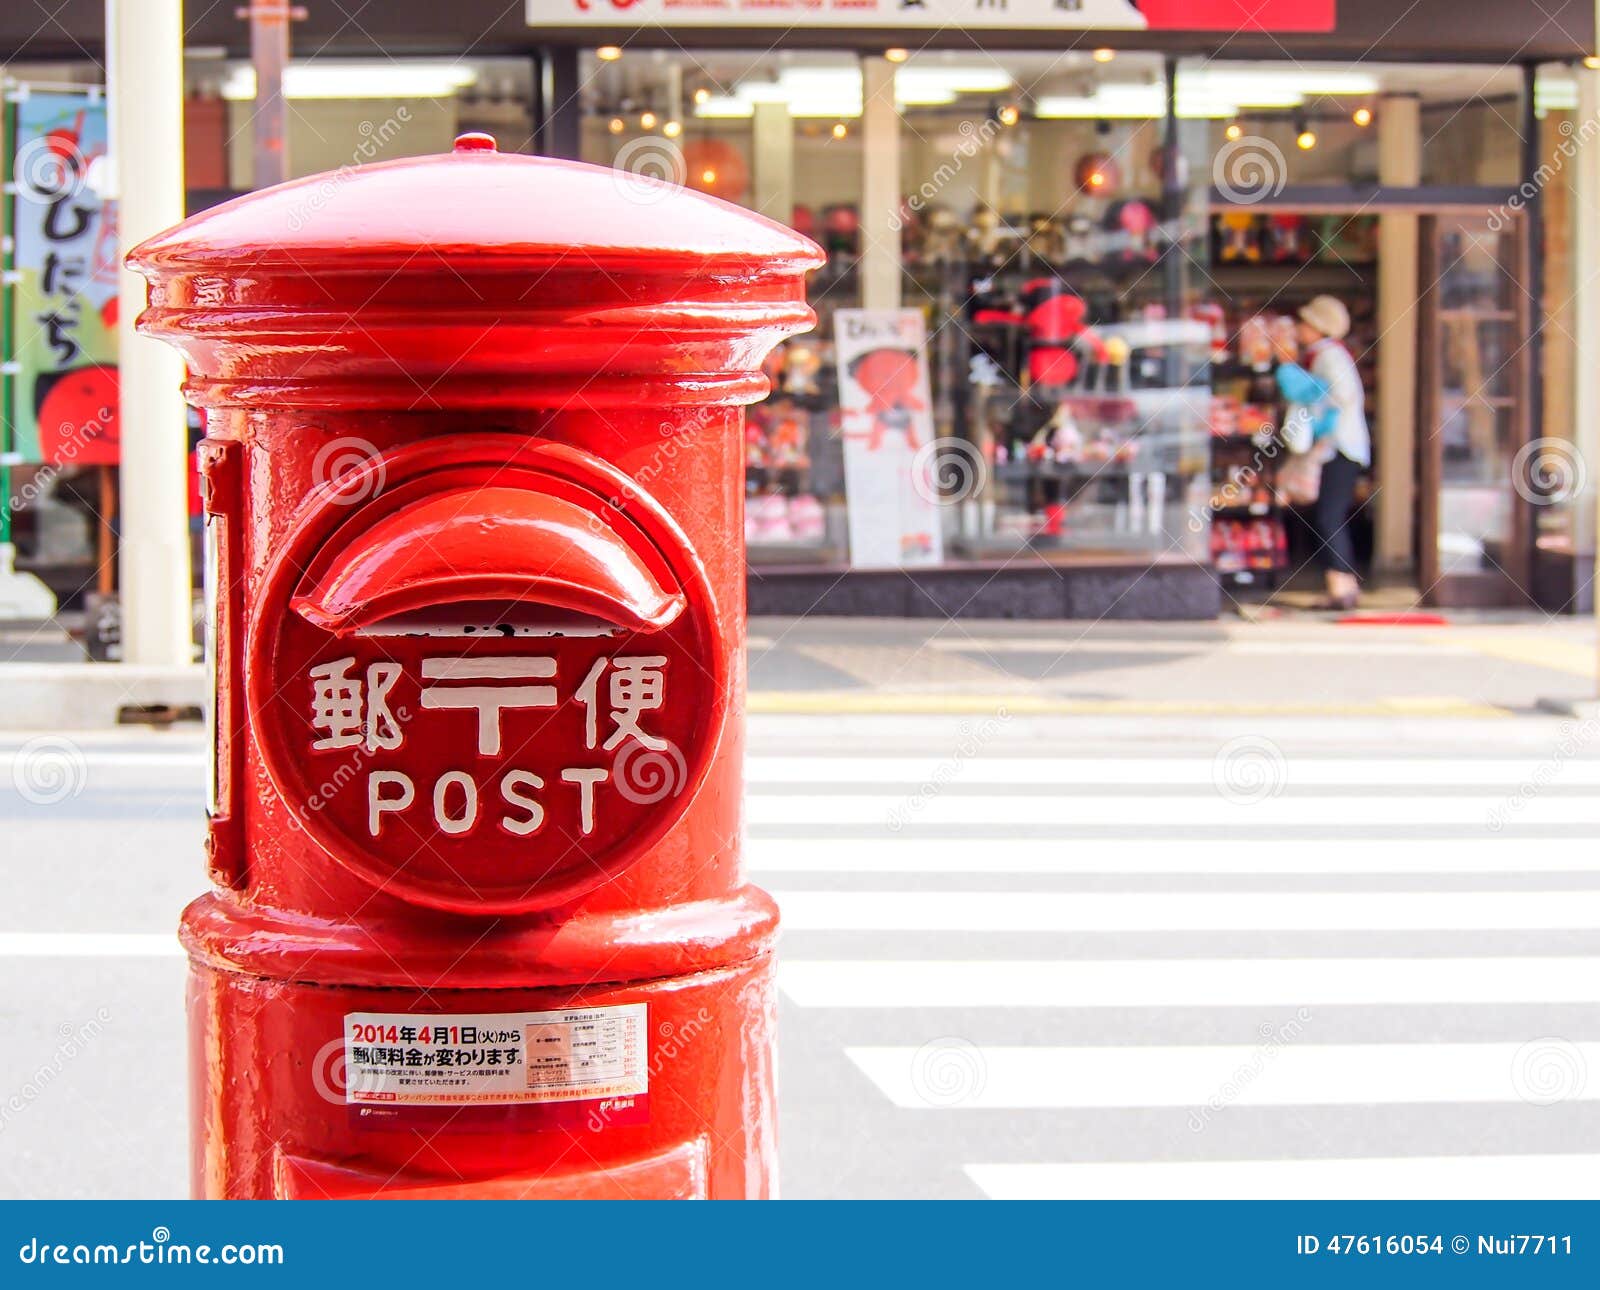 Japanese post box editorial stock image. Image of area - 47616054